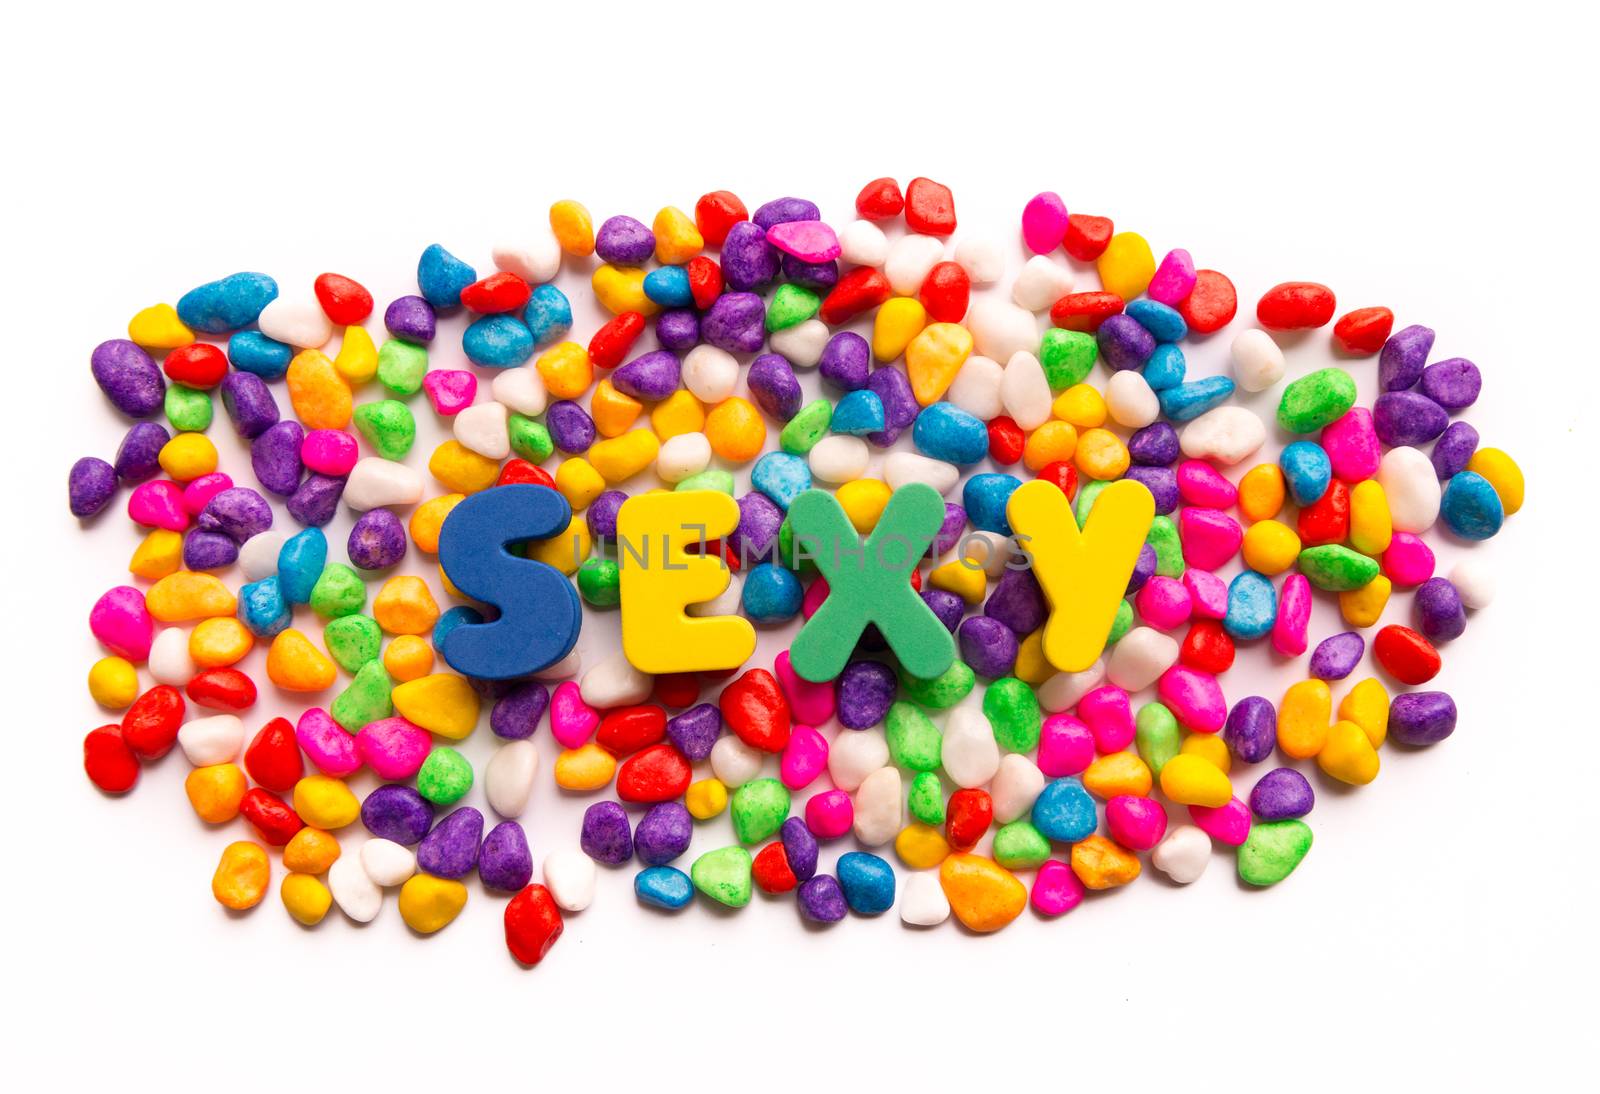 SEXY word in colorful stone